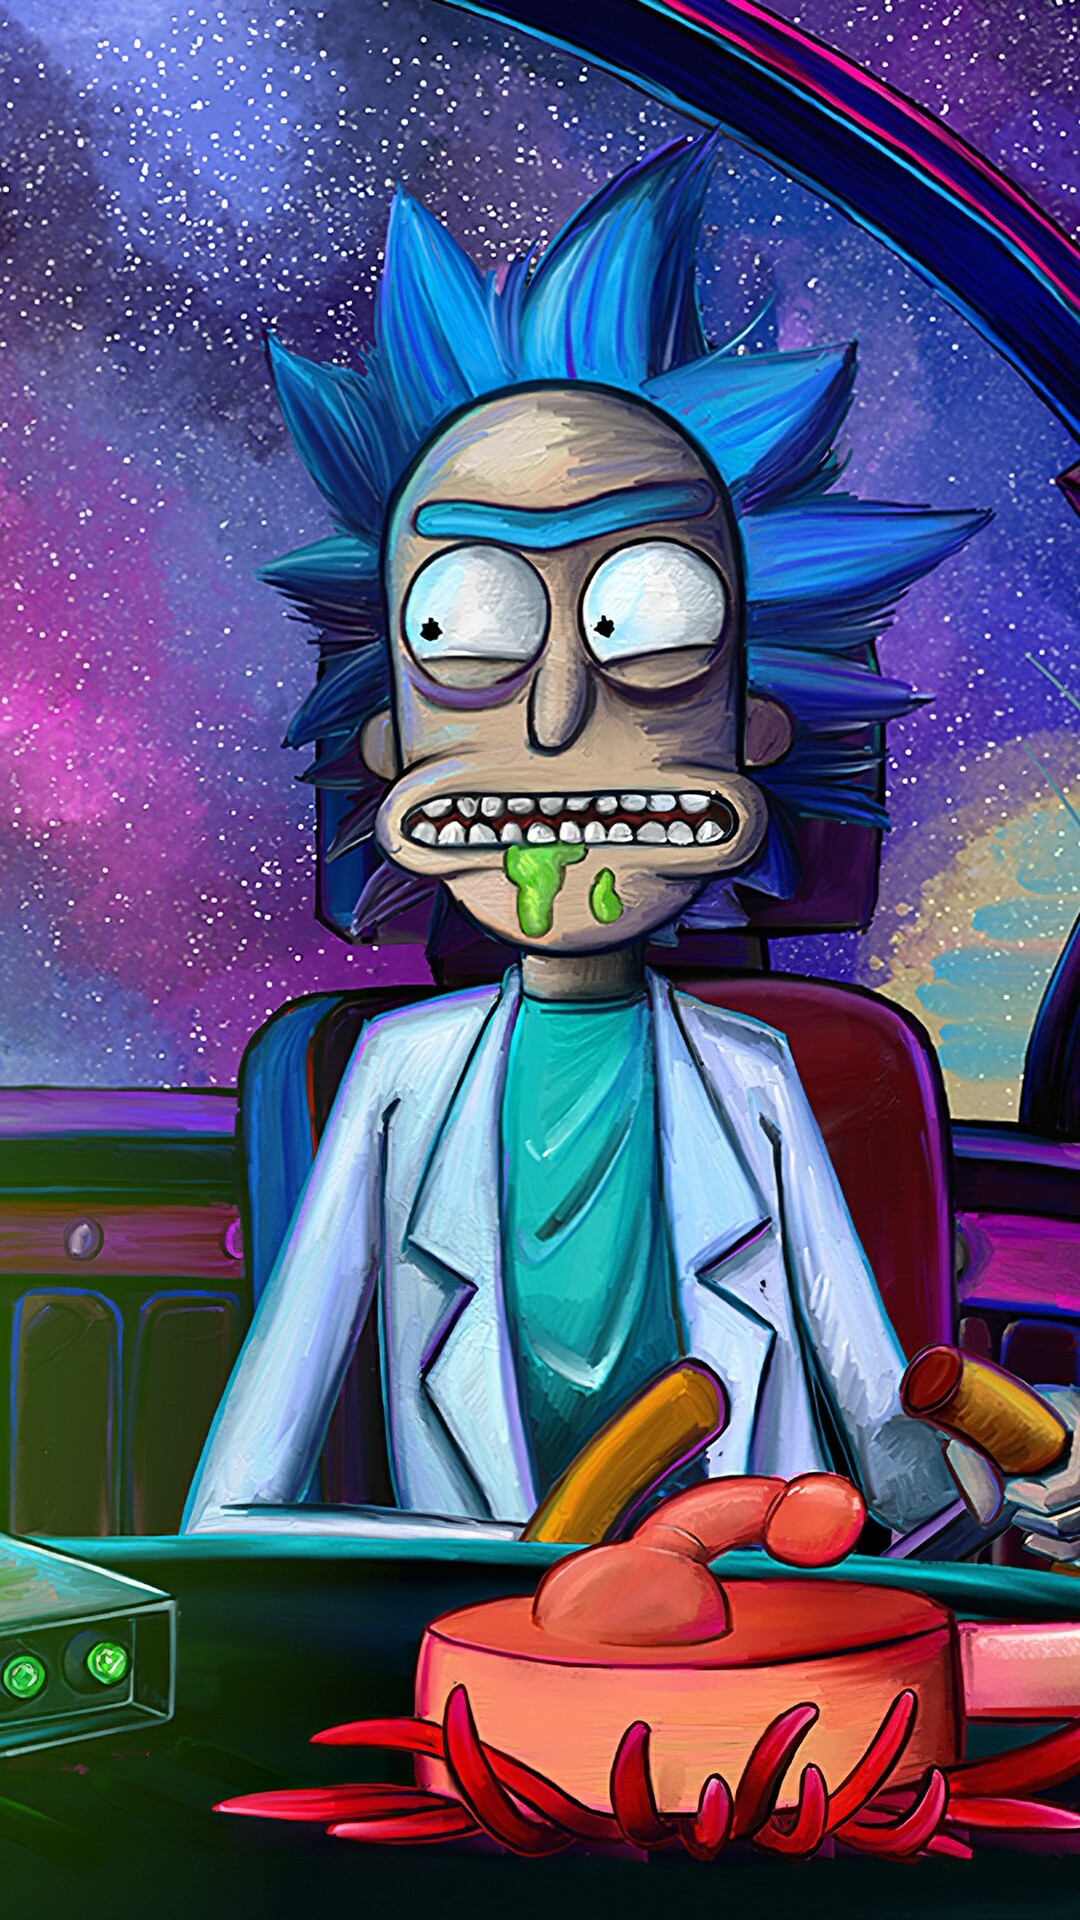 Rick and Morty Wallpaper - Free Wallpapers for Apple iPhone And Samsung